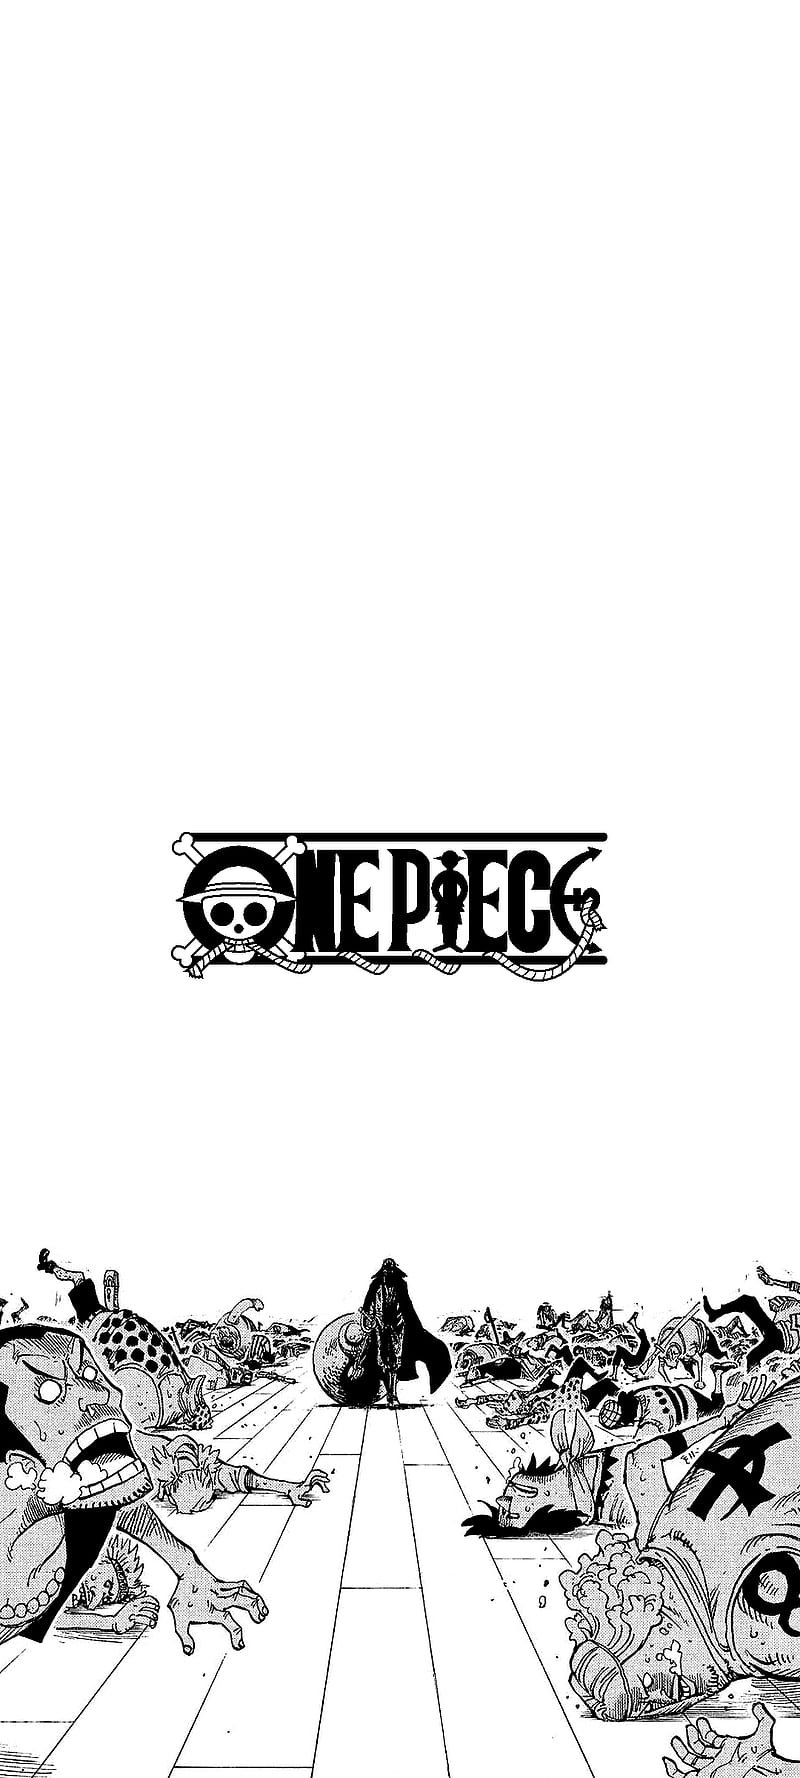 Is this true i found it on twitter : r/OnePiece